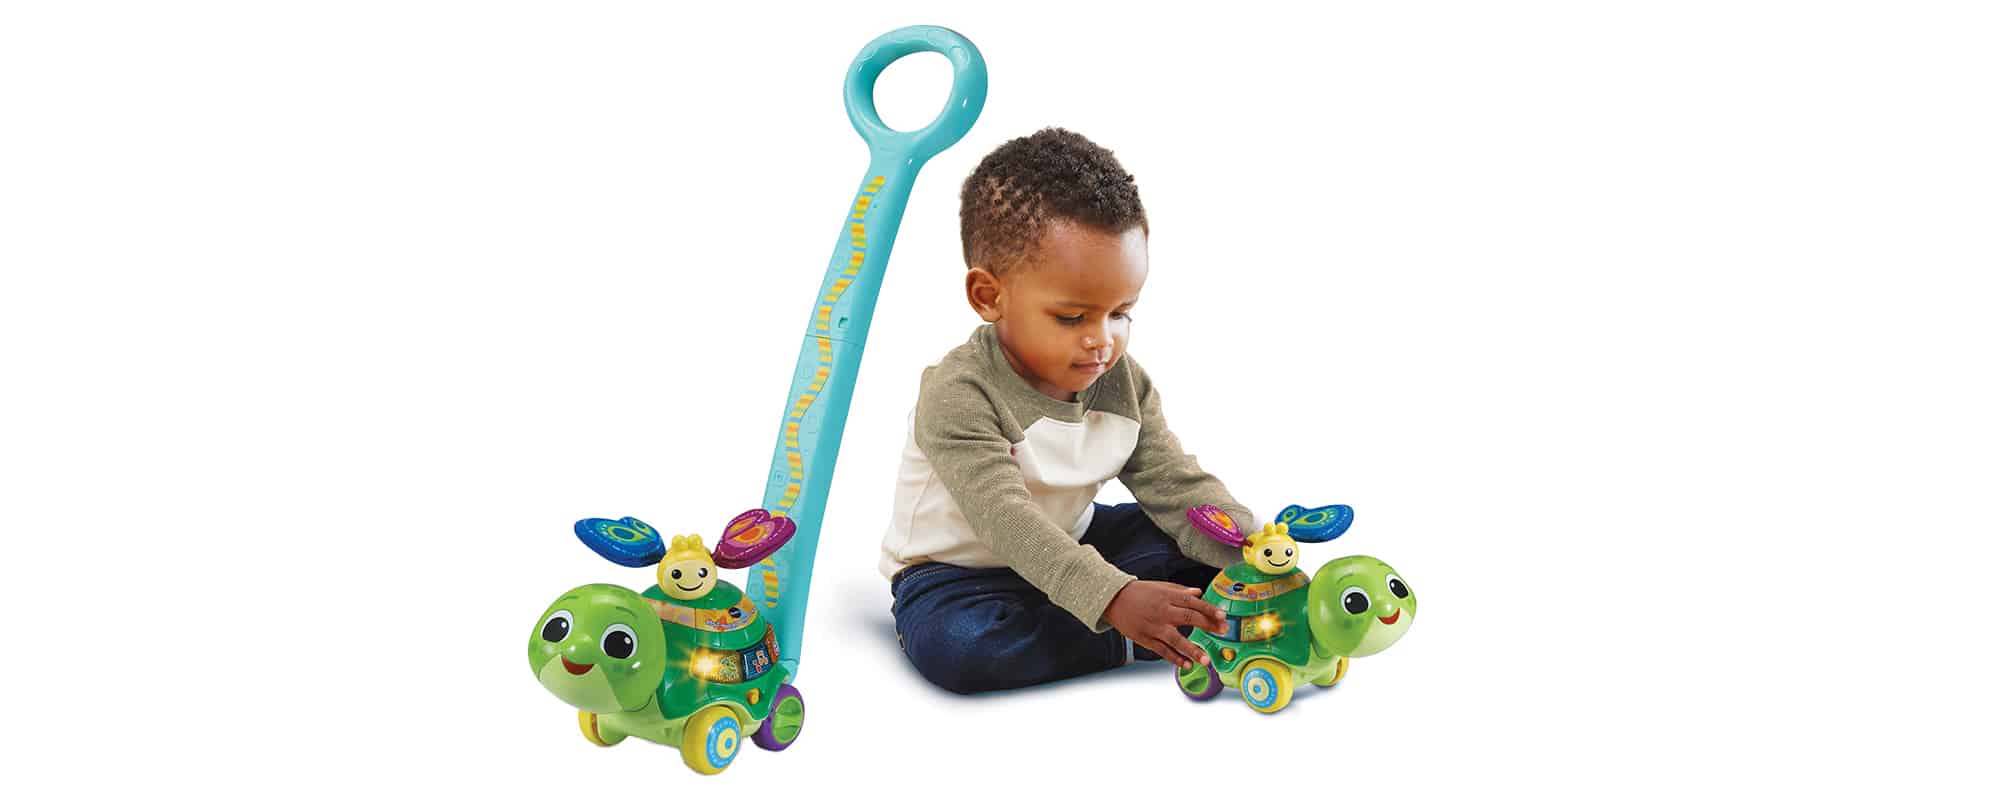 WIN A 2-in-1 Push and Discover Turtle